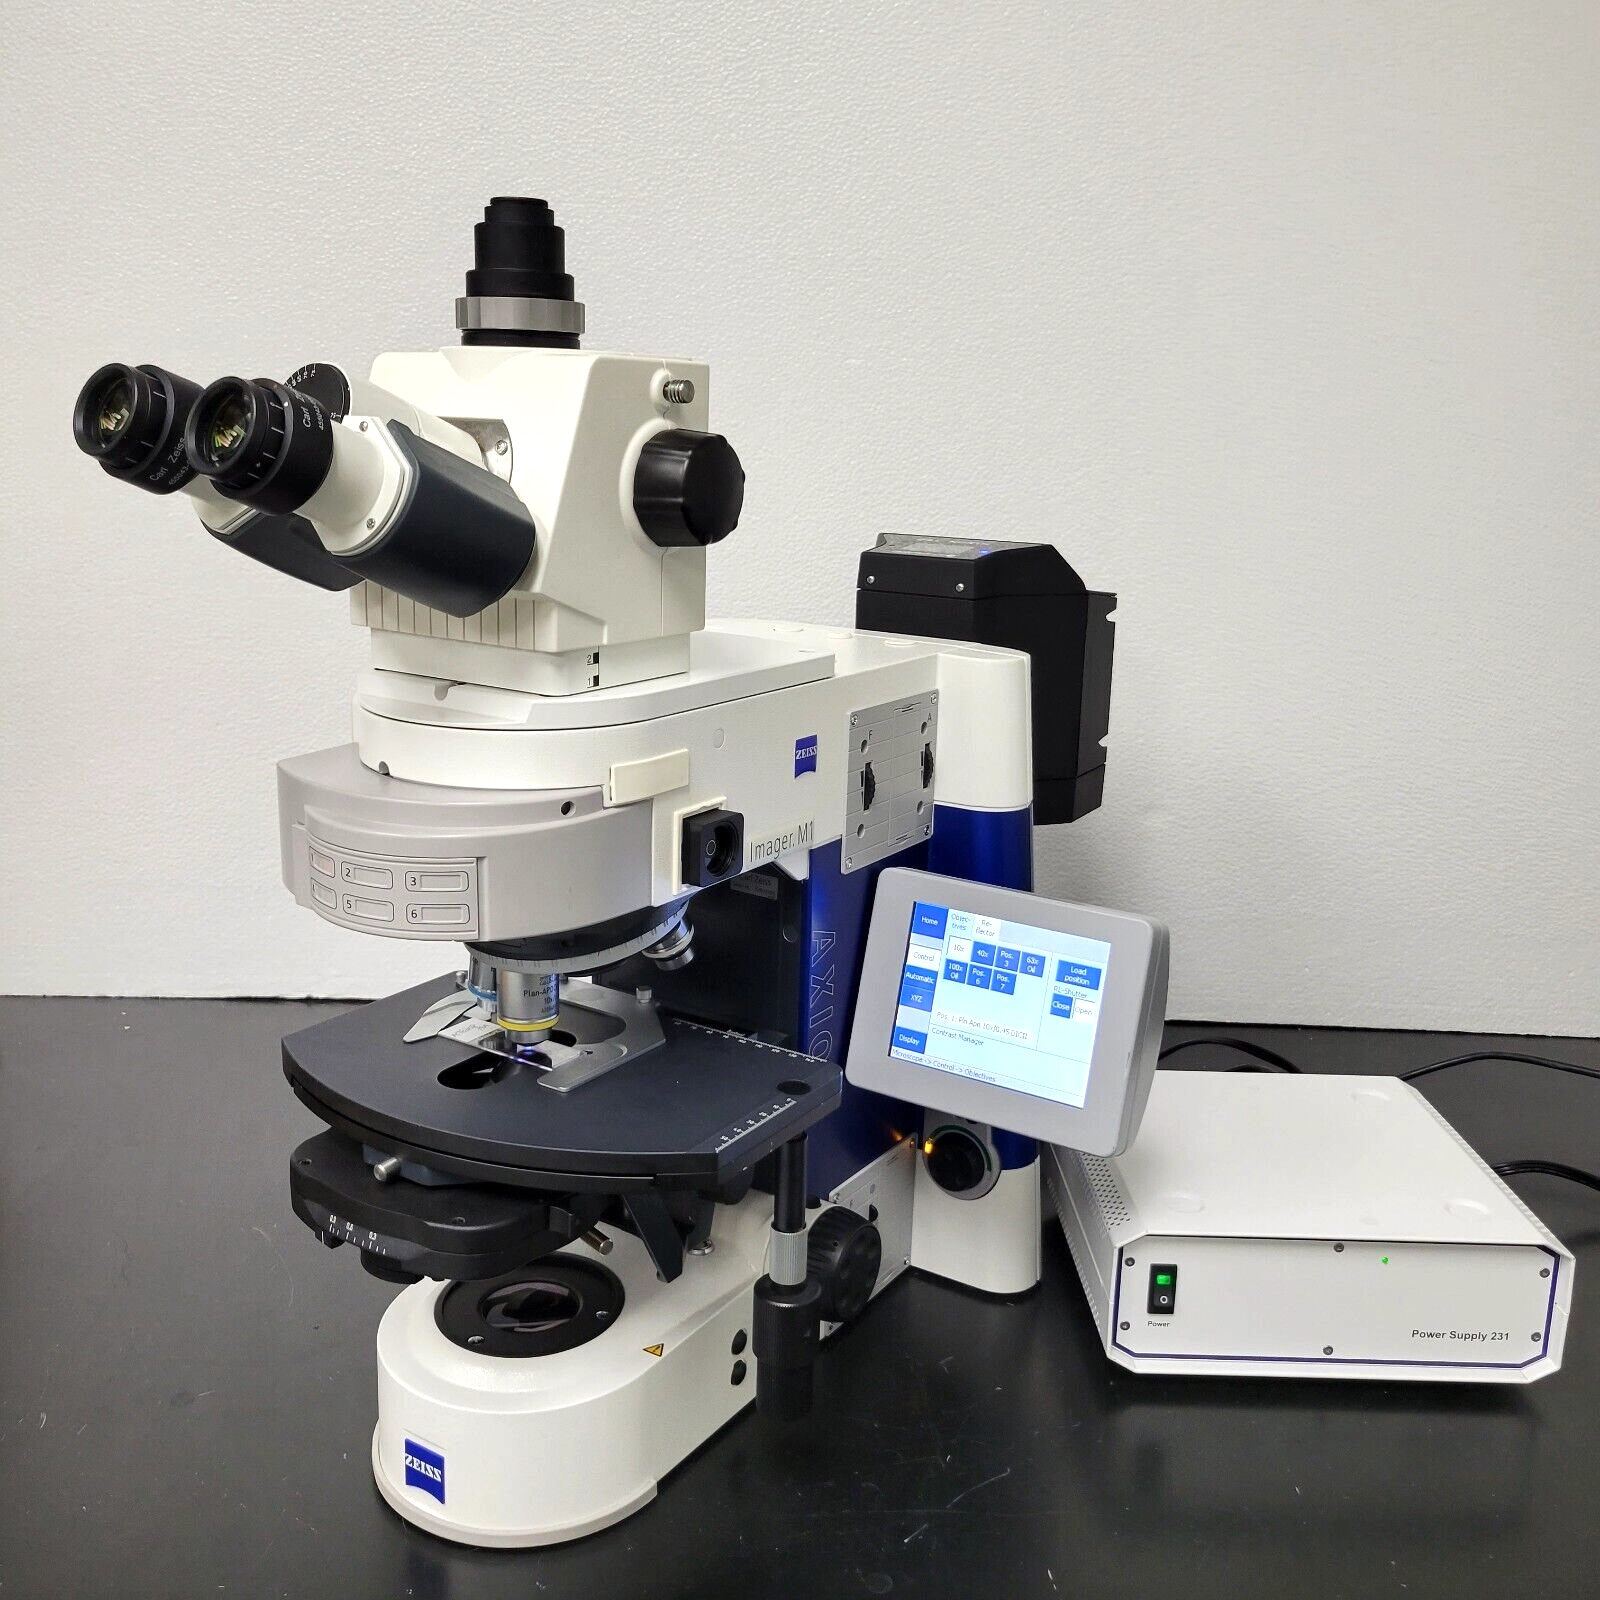 Zeiss Microscope Axio Imager.M1 Motorized with Fluorescence and Plan Apochromats